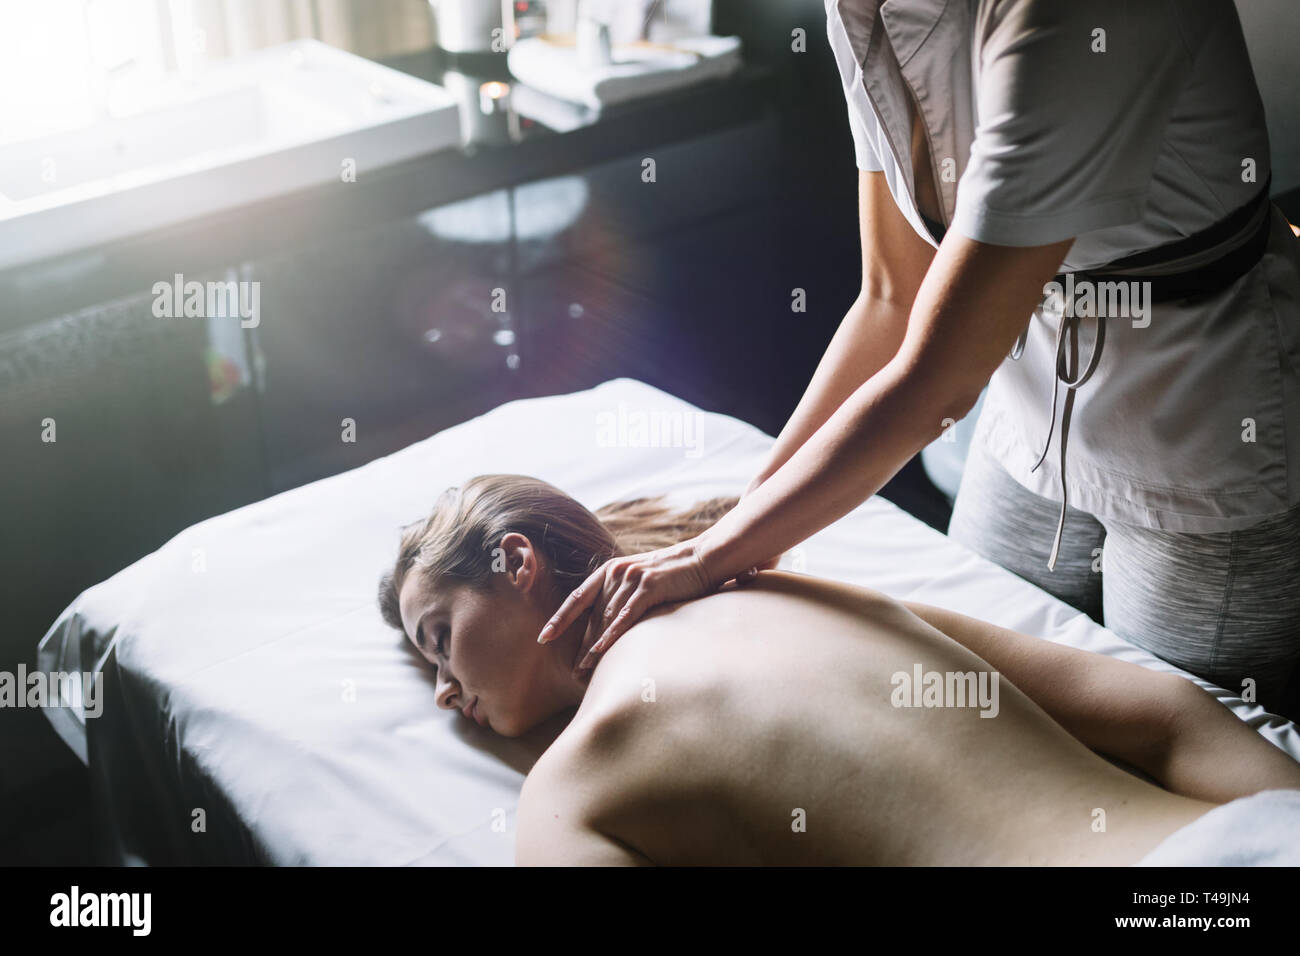 Masseur doing massage on woman body in the spa salon. Beauty treatment concept. Stock Photo